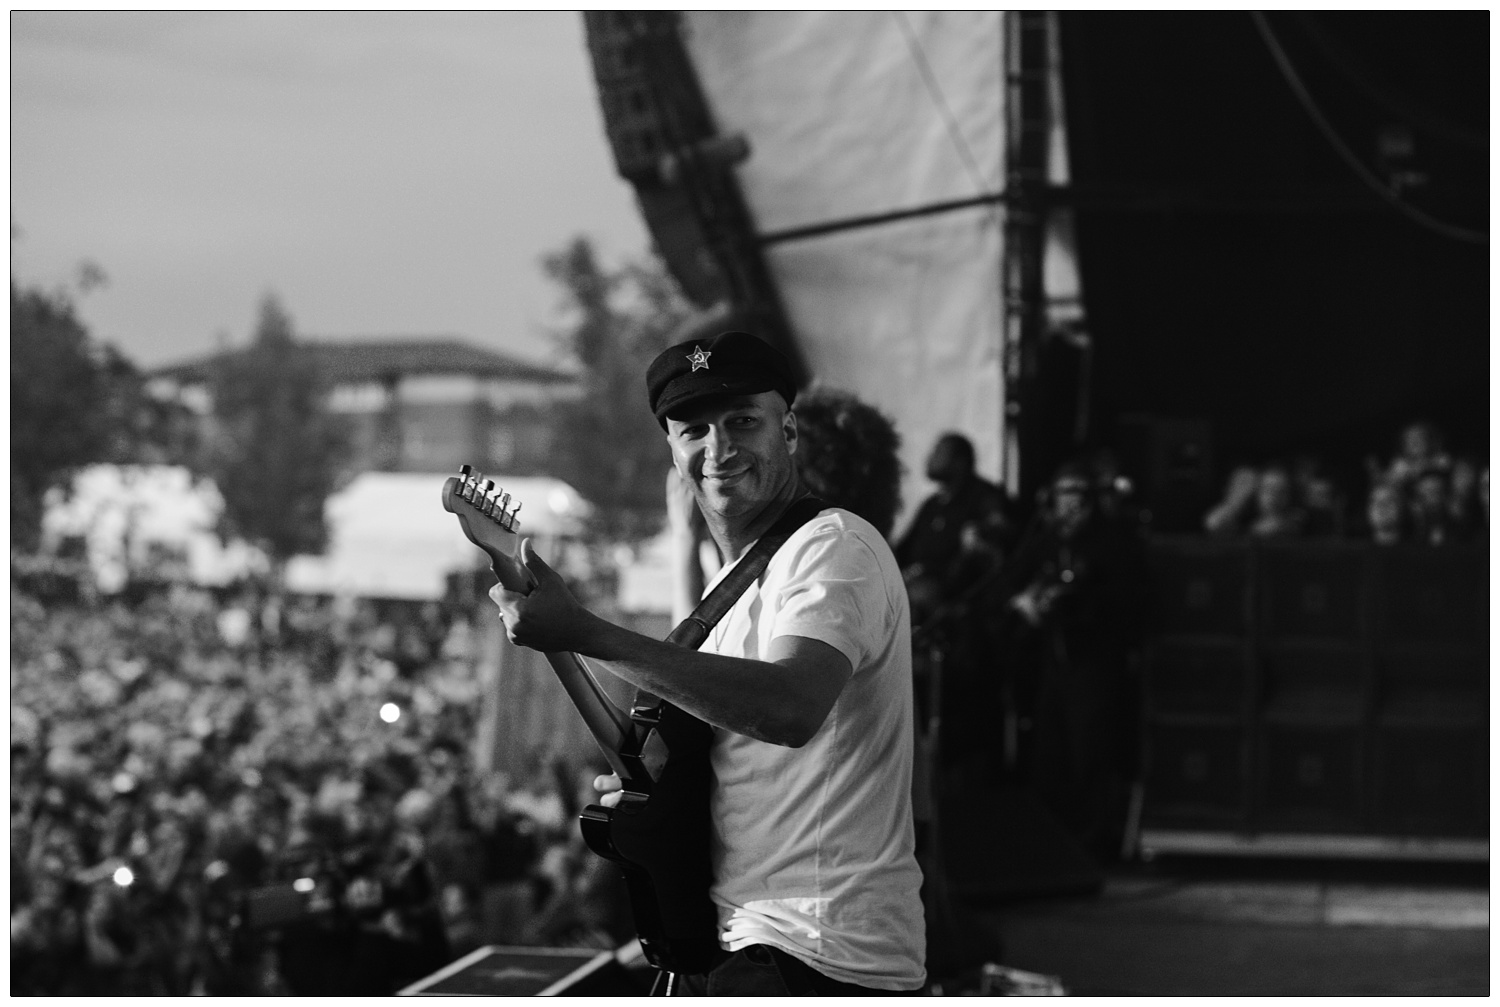 Tom Morello smiling at Rage Against the Machine gig in 2010.